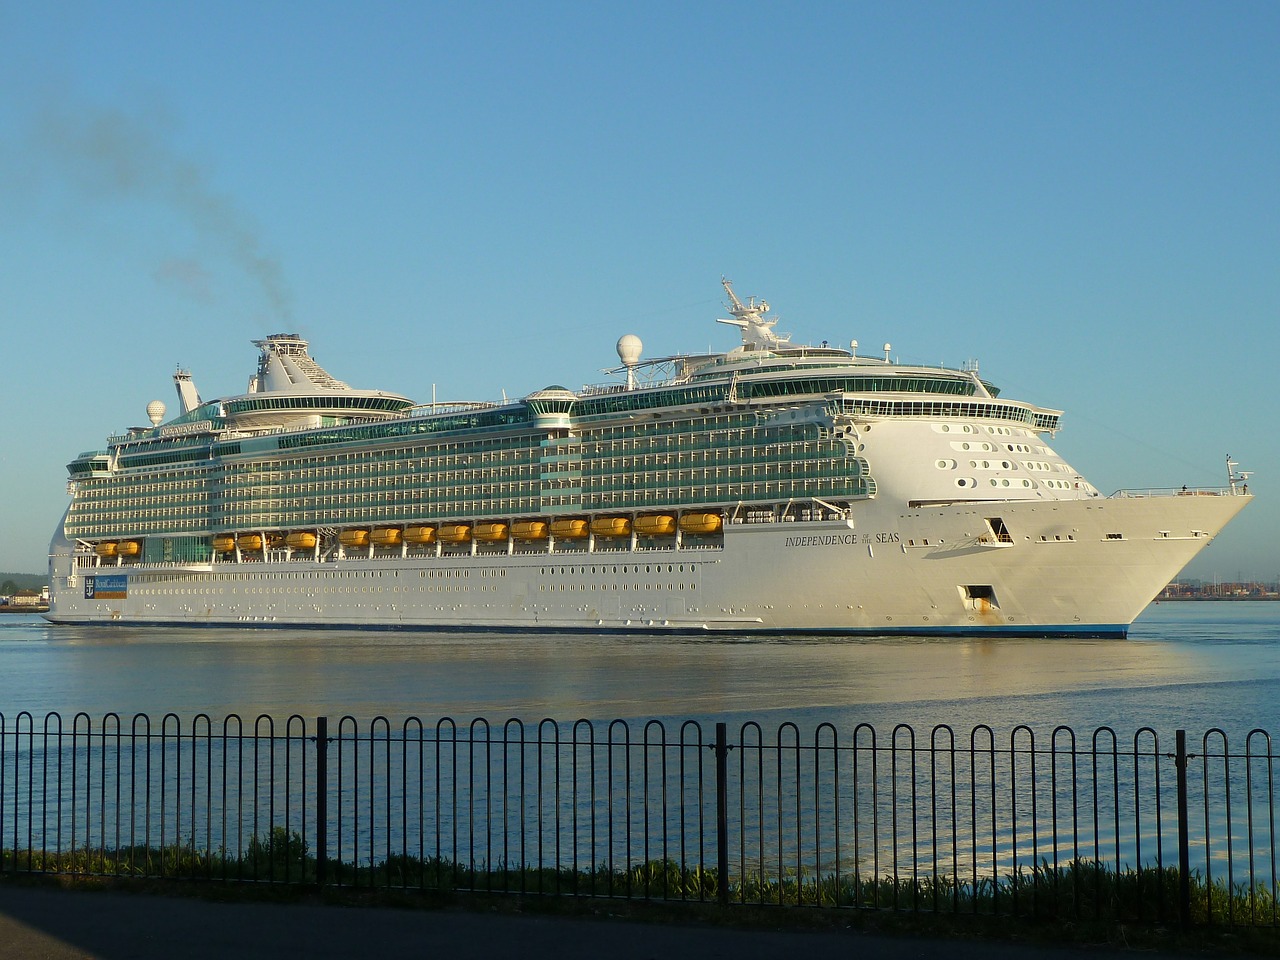 Independence of the Seas - Royal Caribbean